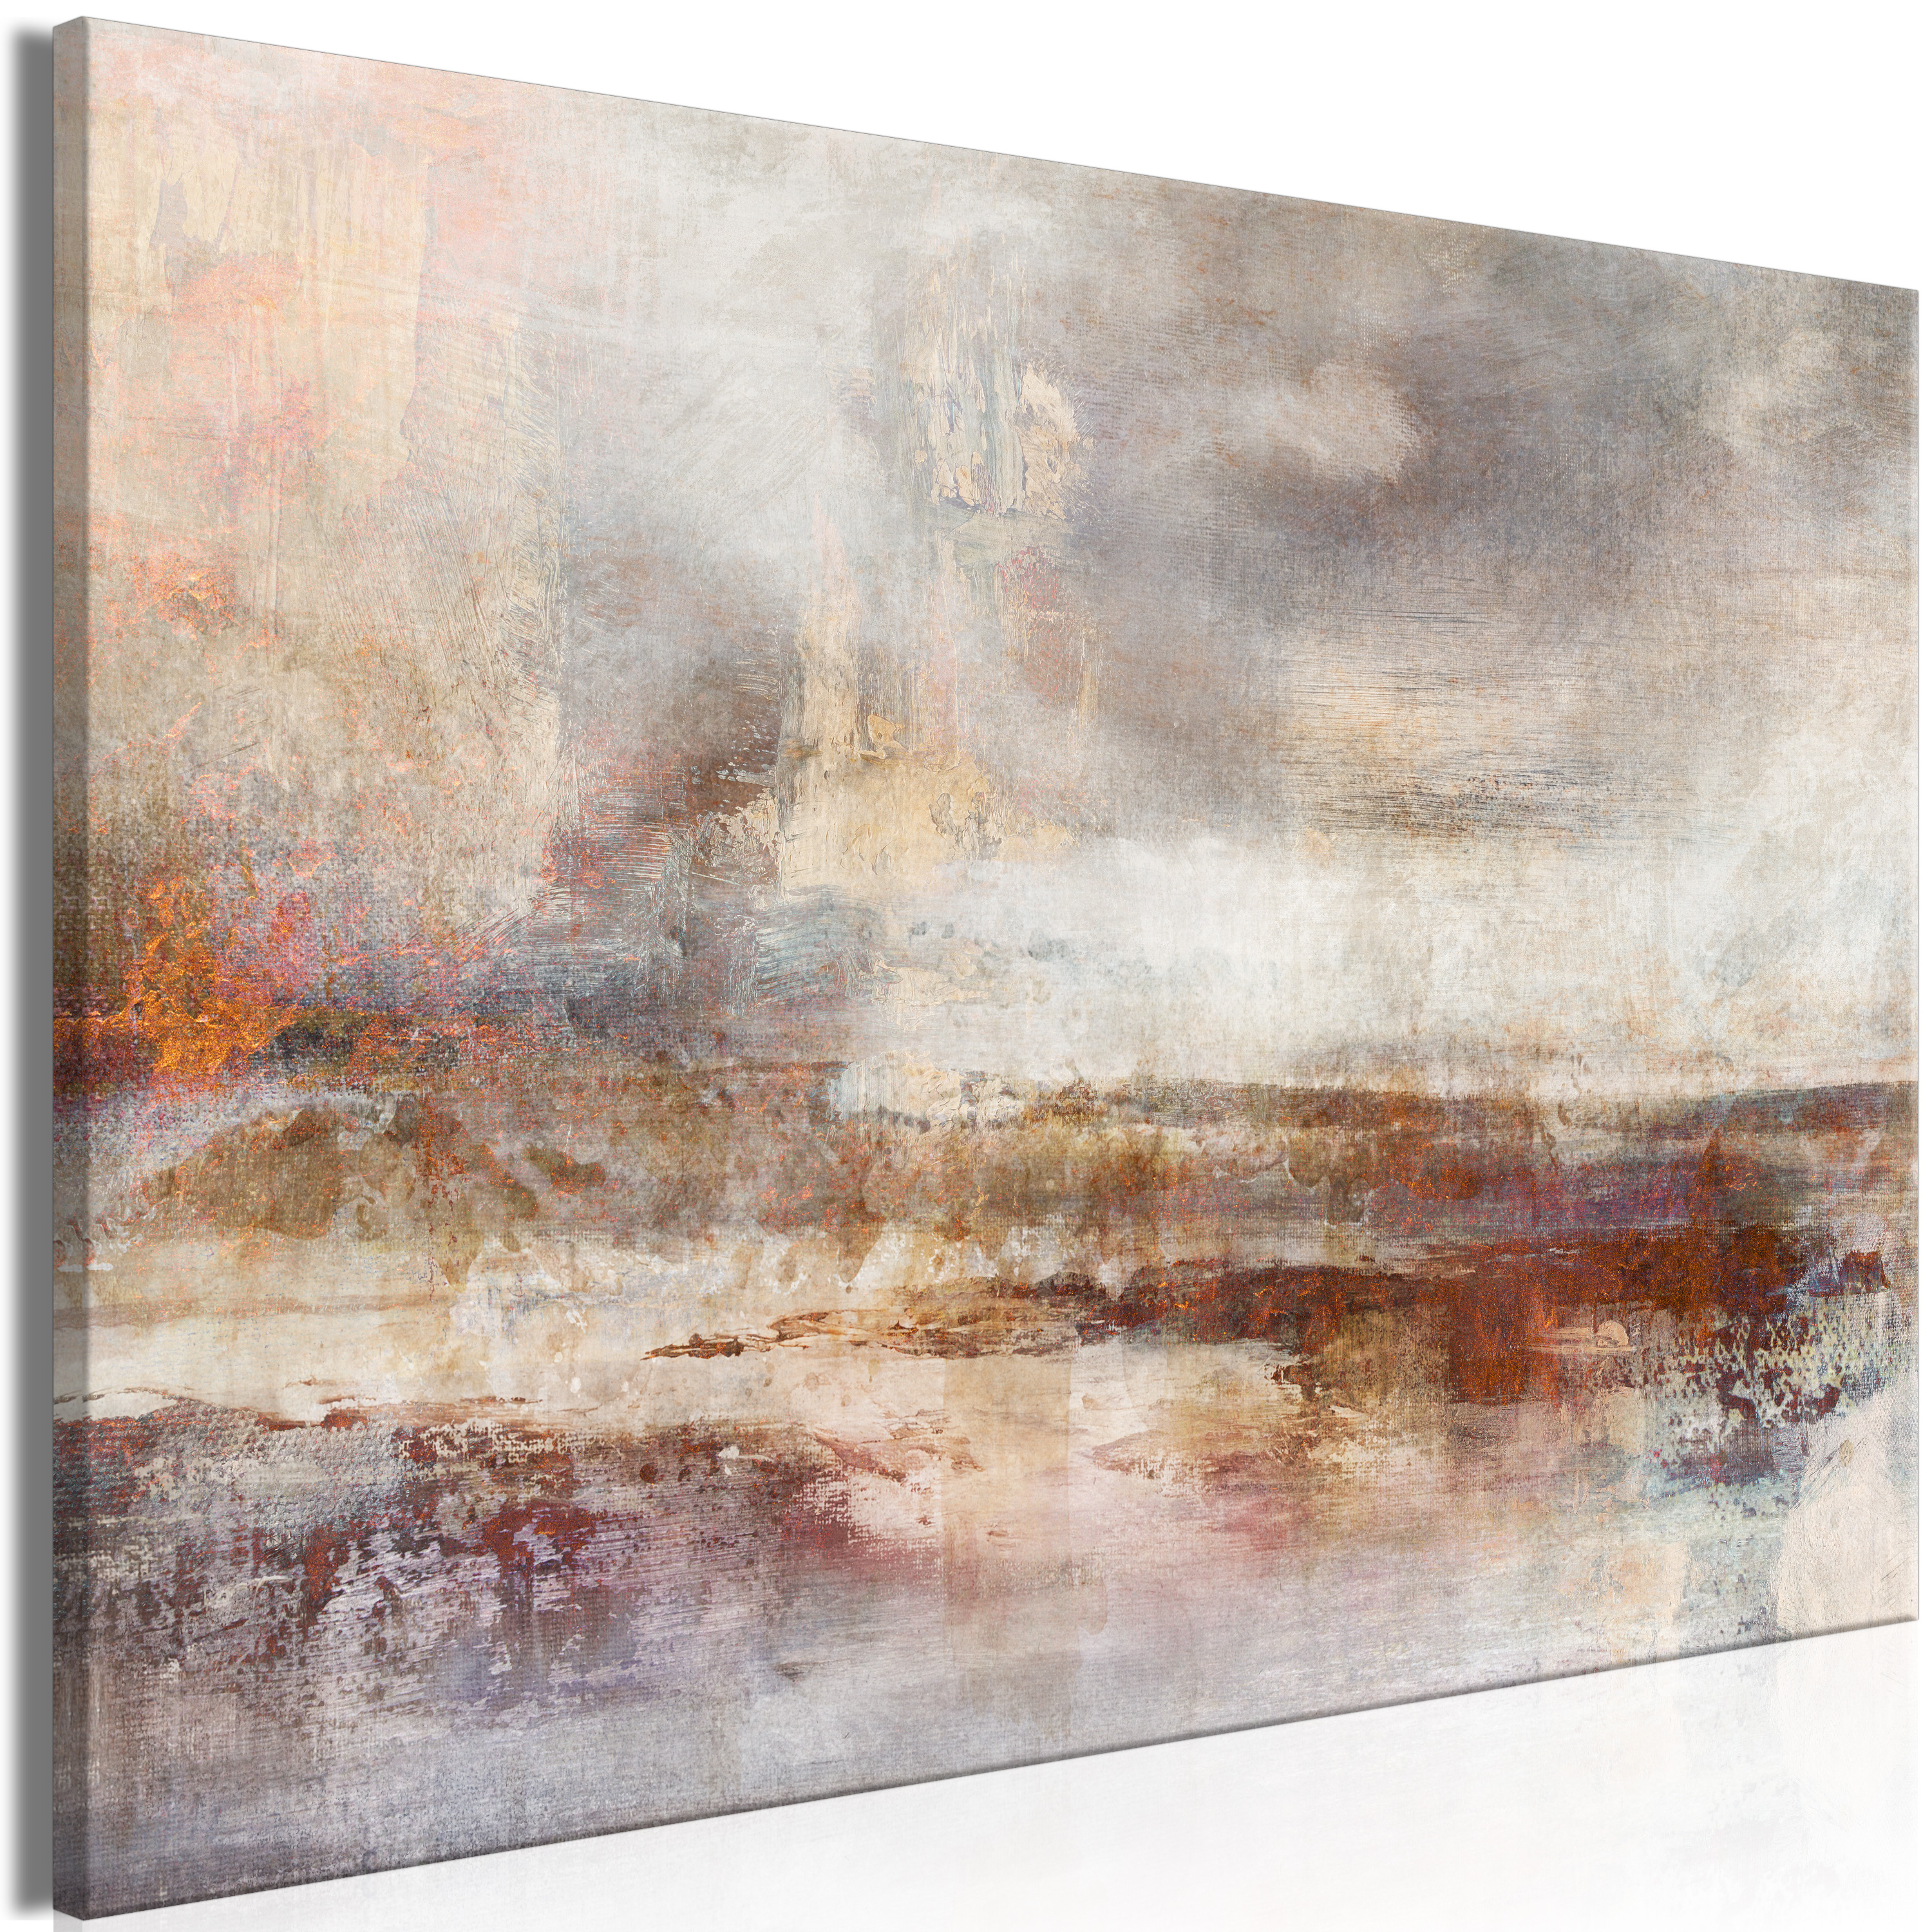 Canvas Print - Transience (1 Part) Wide - 90x60